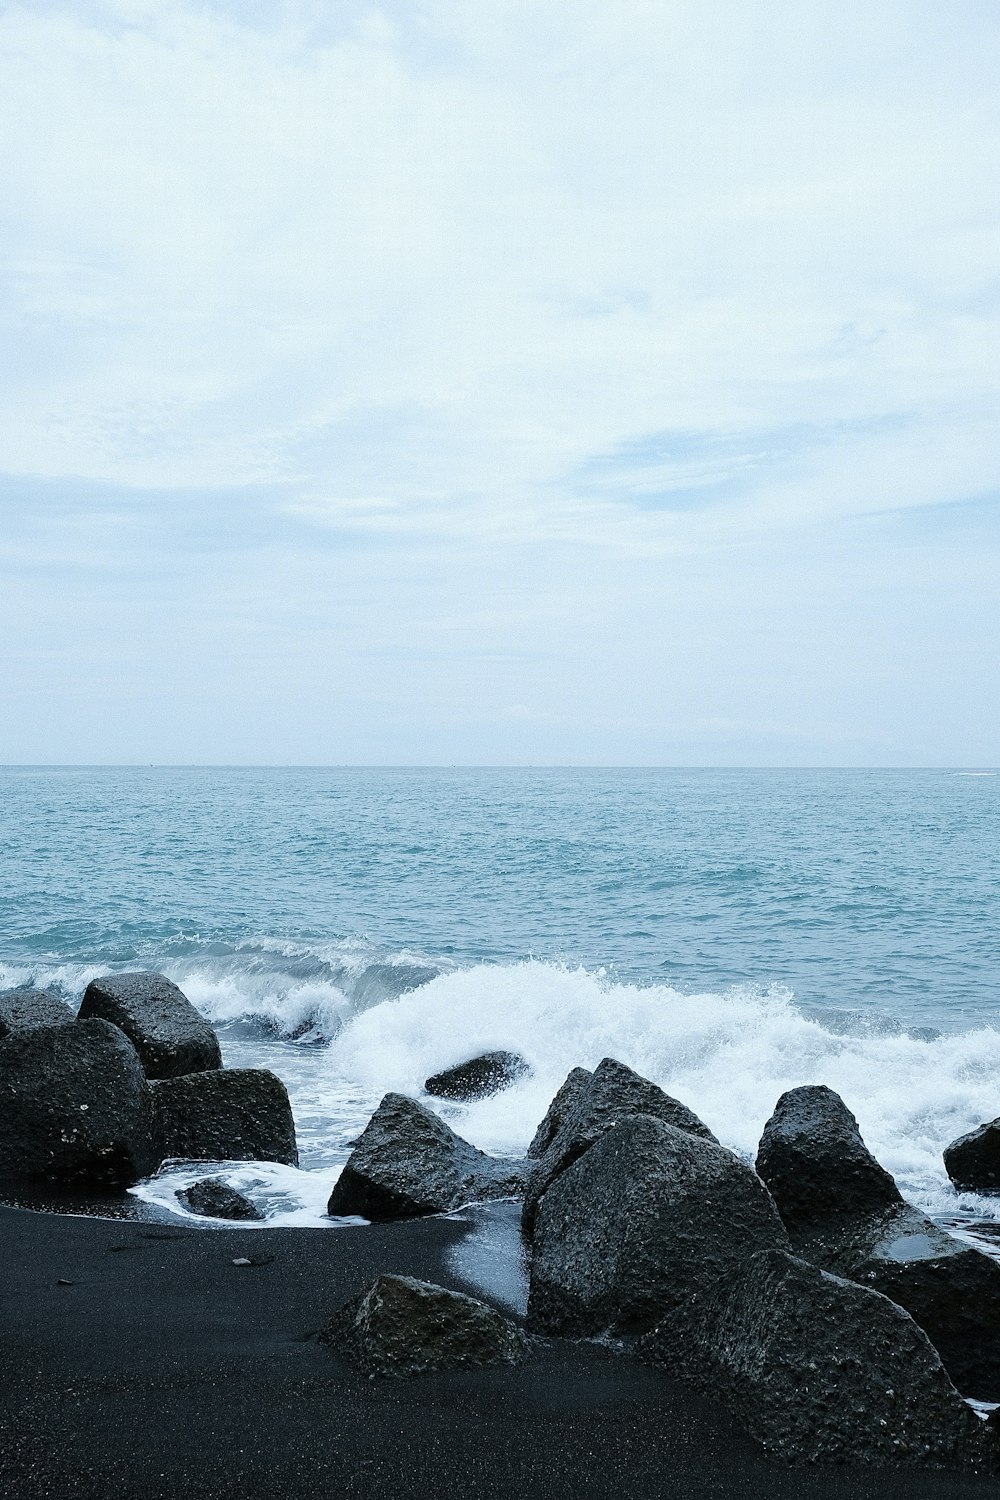 a black sand beach with rocks and a body of water